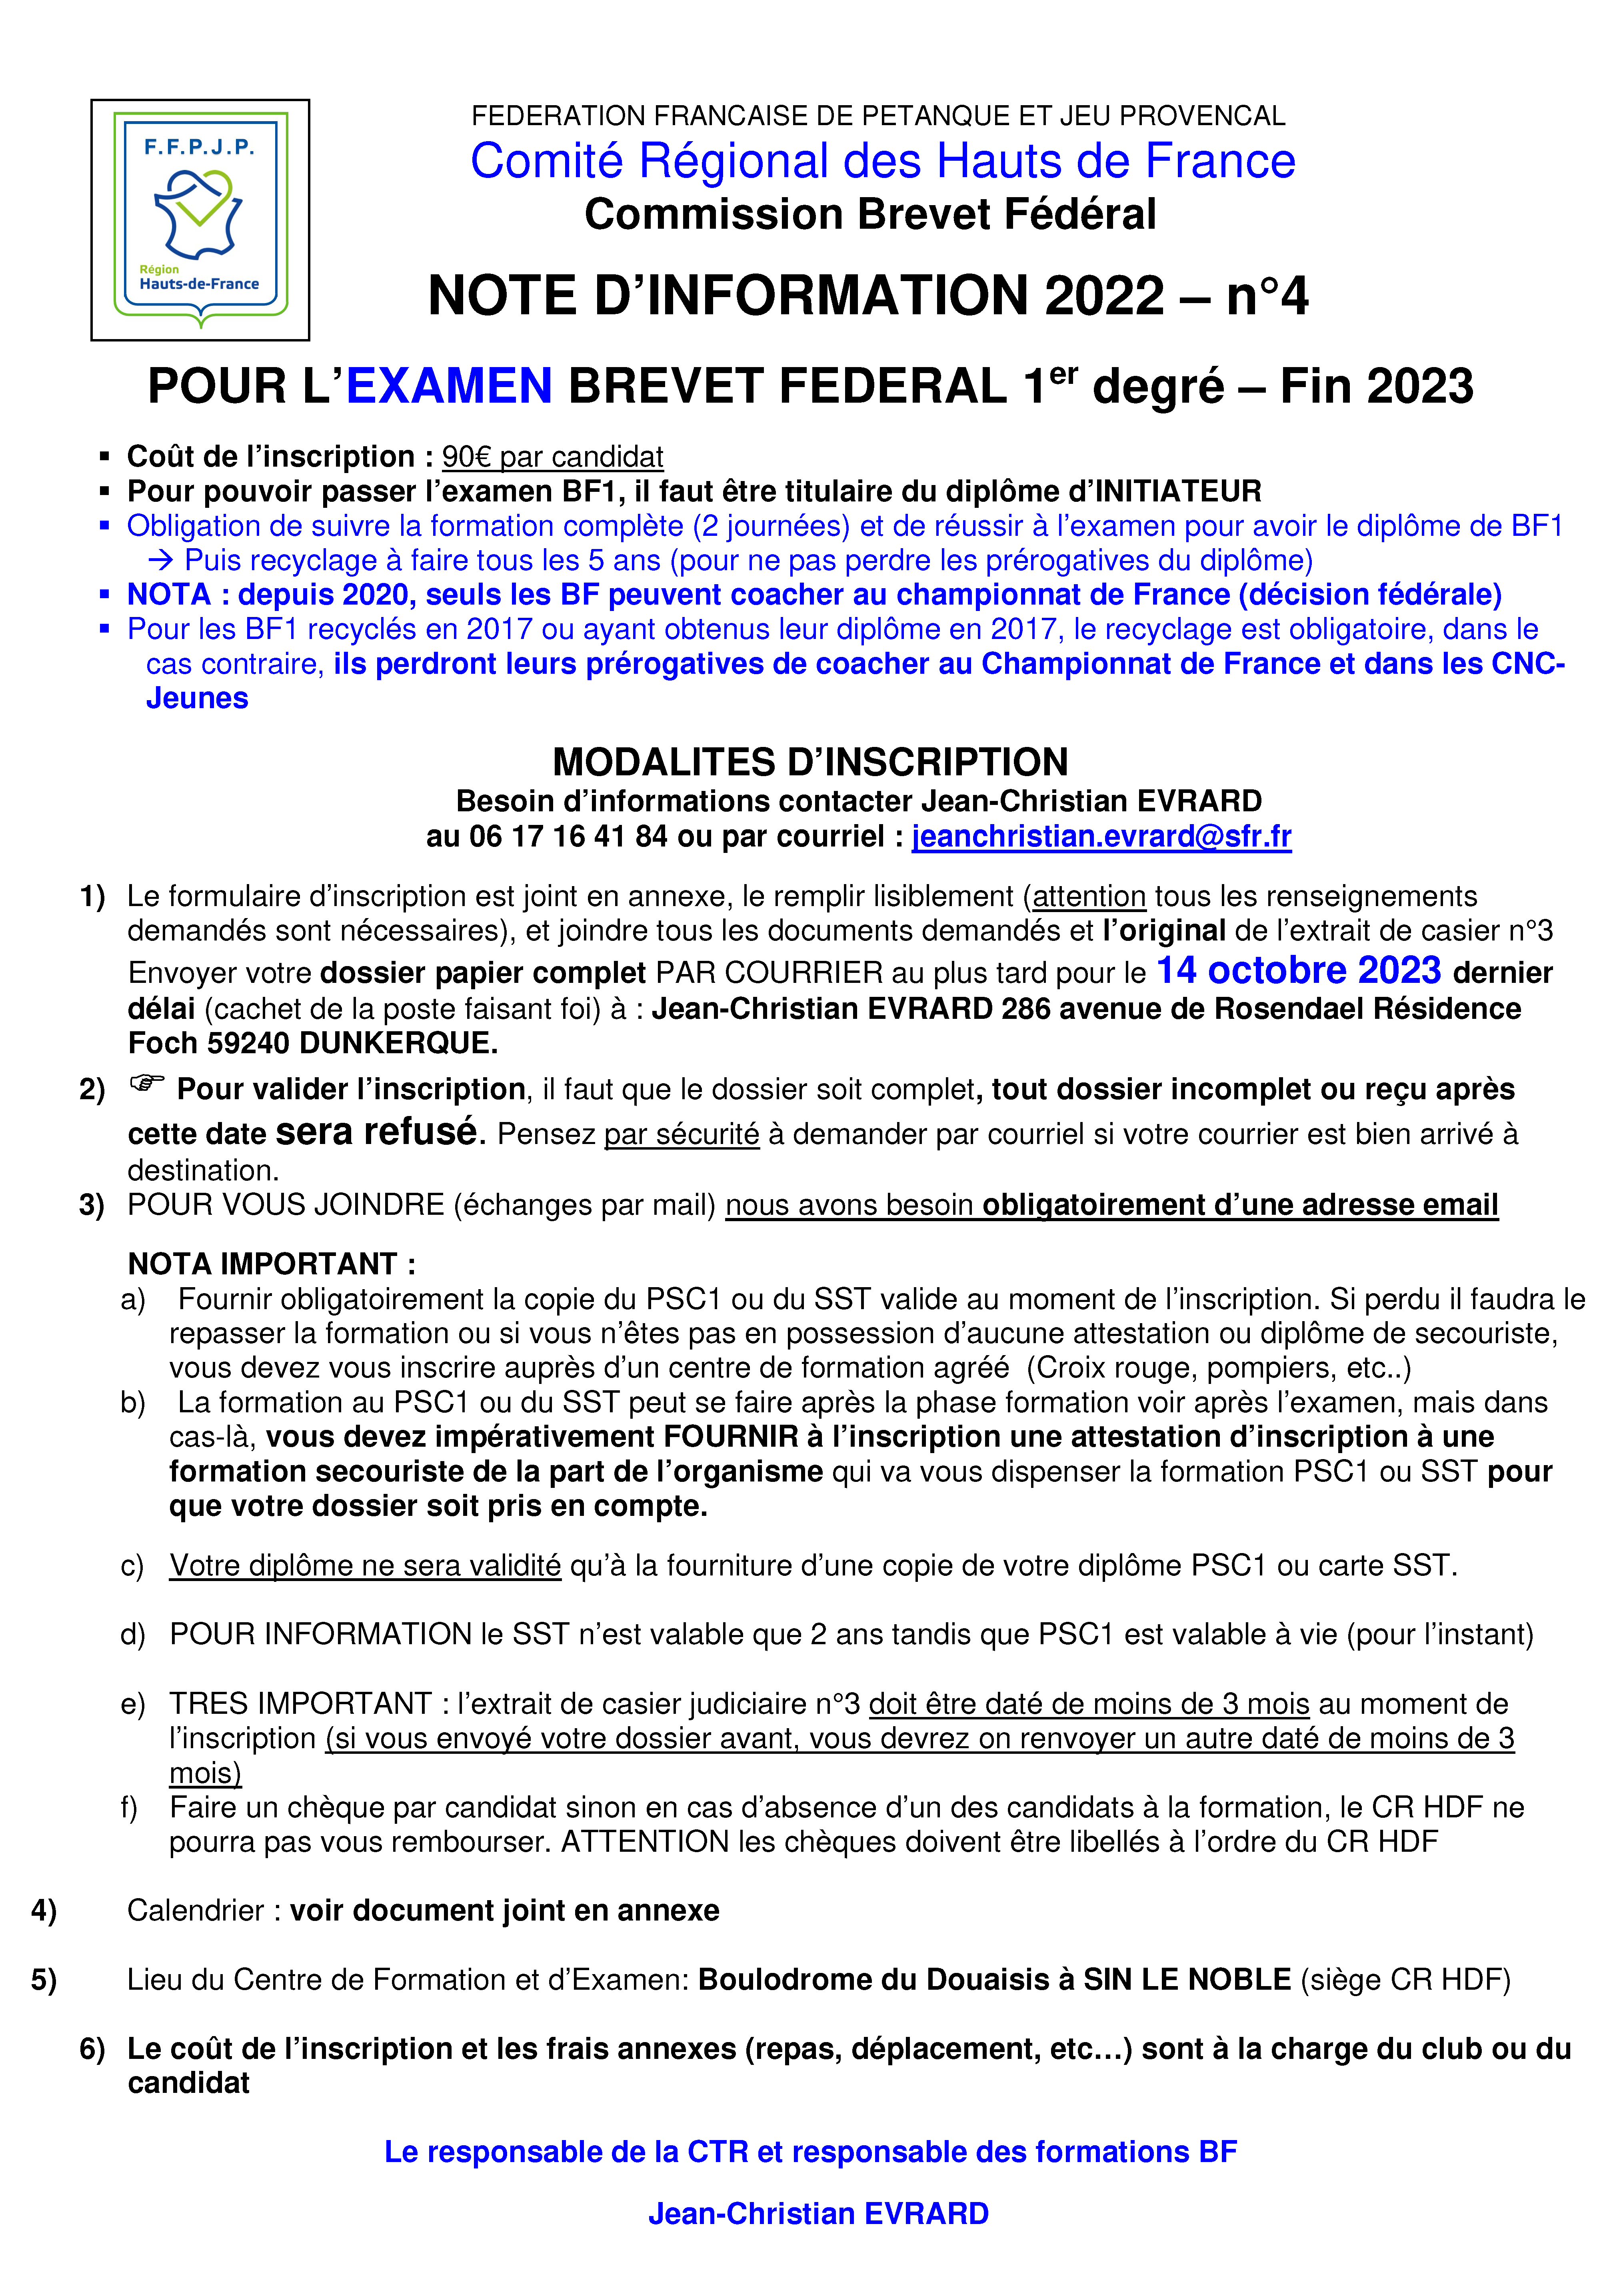 2023 (fin)   Note Info n°4  Examen BF1 Page 1